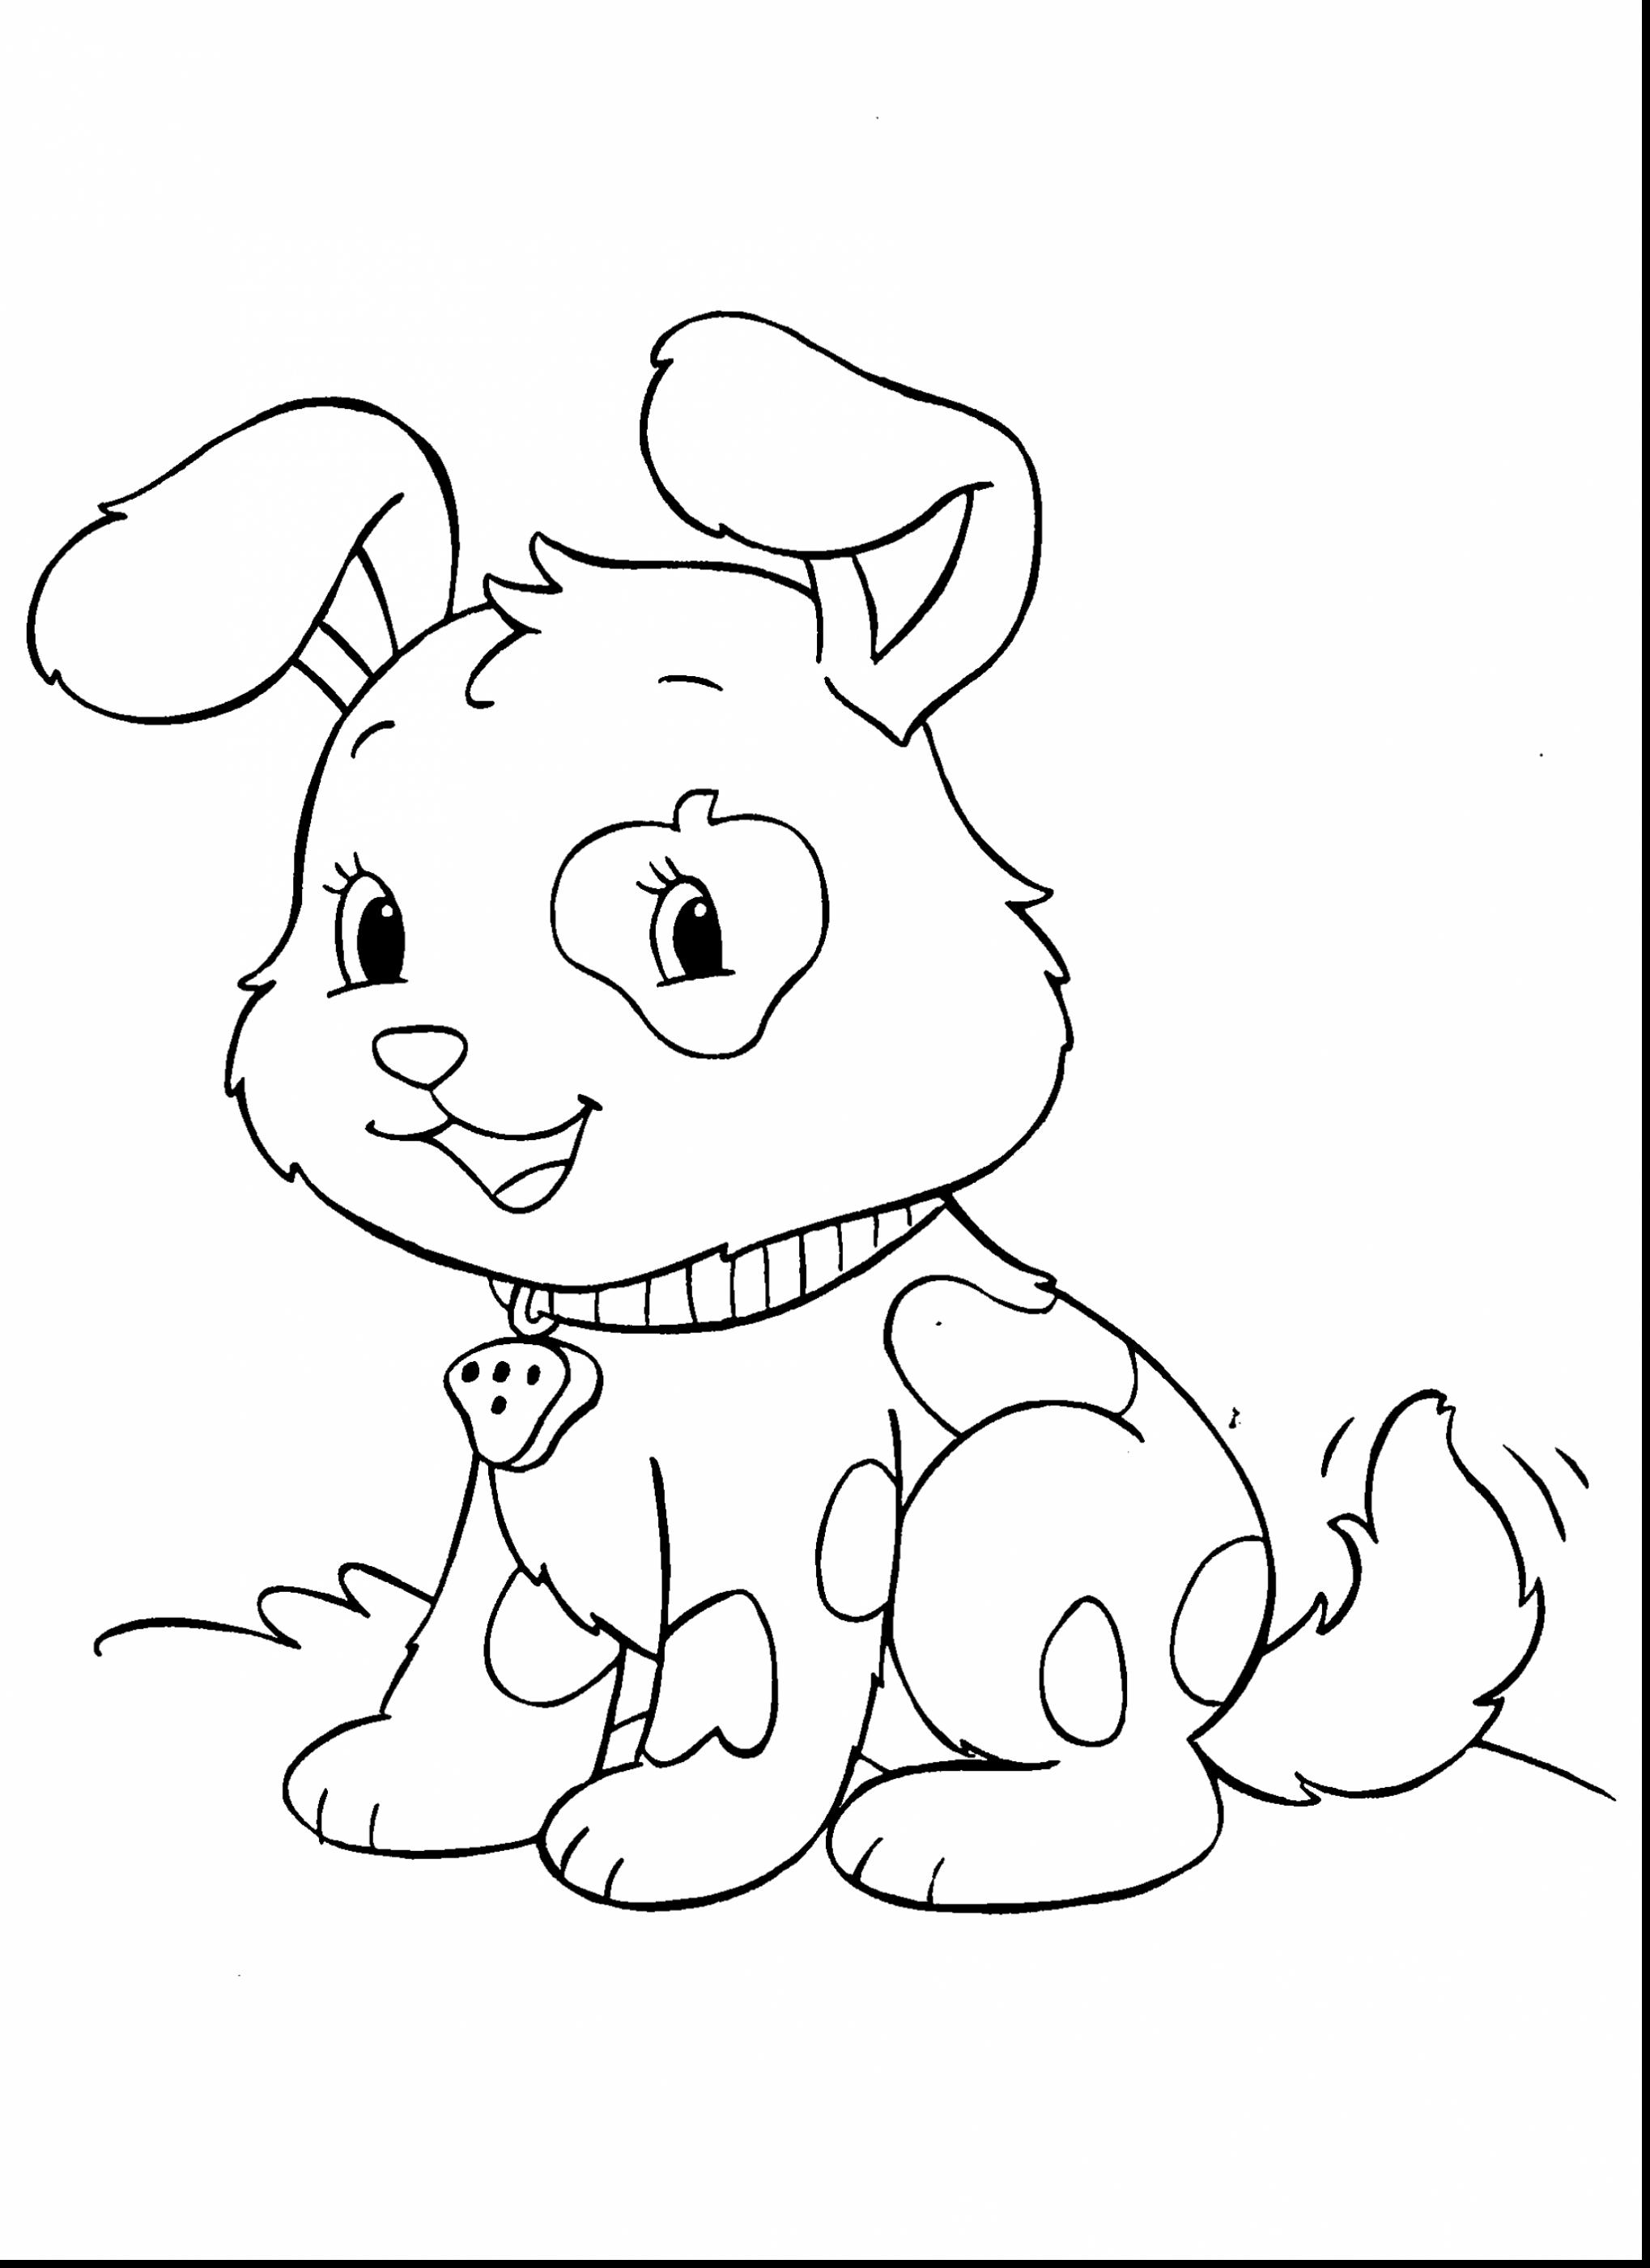 Cute Baby Animal Coloring Pages at GetColorings.com | Free ...